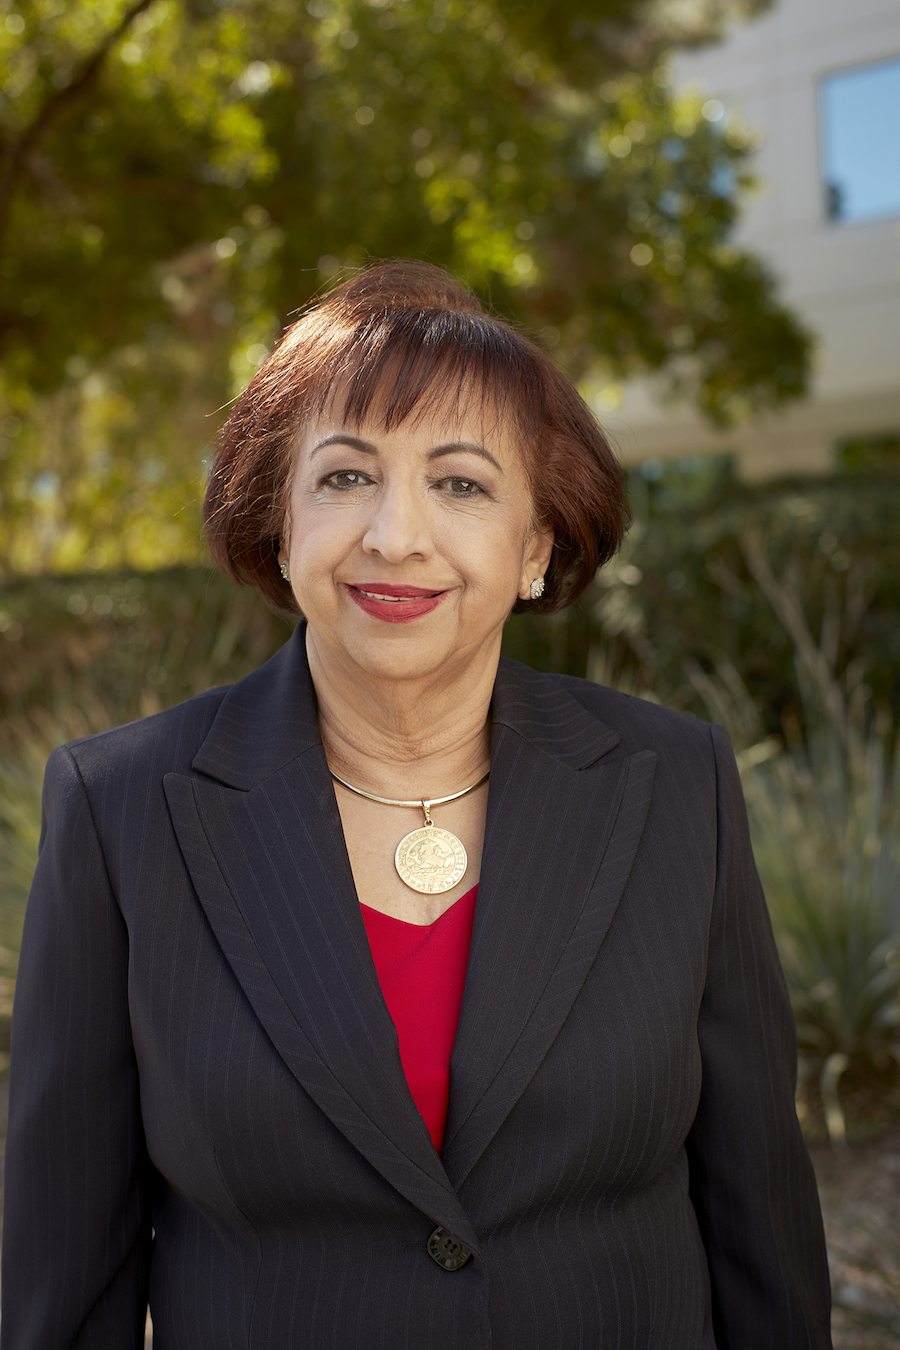 The Dignity Health Board of Directors has appointed Rita Vaswani to the Dignity Health-St. Rose Dominican Community Board, serving a one-year term